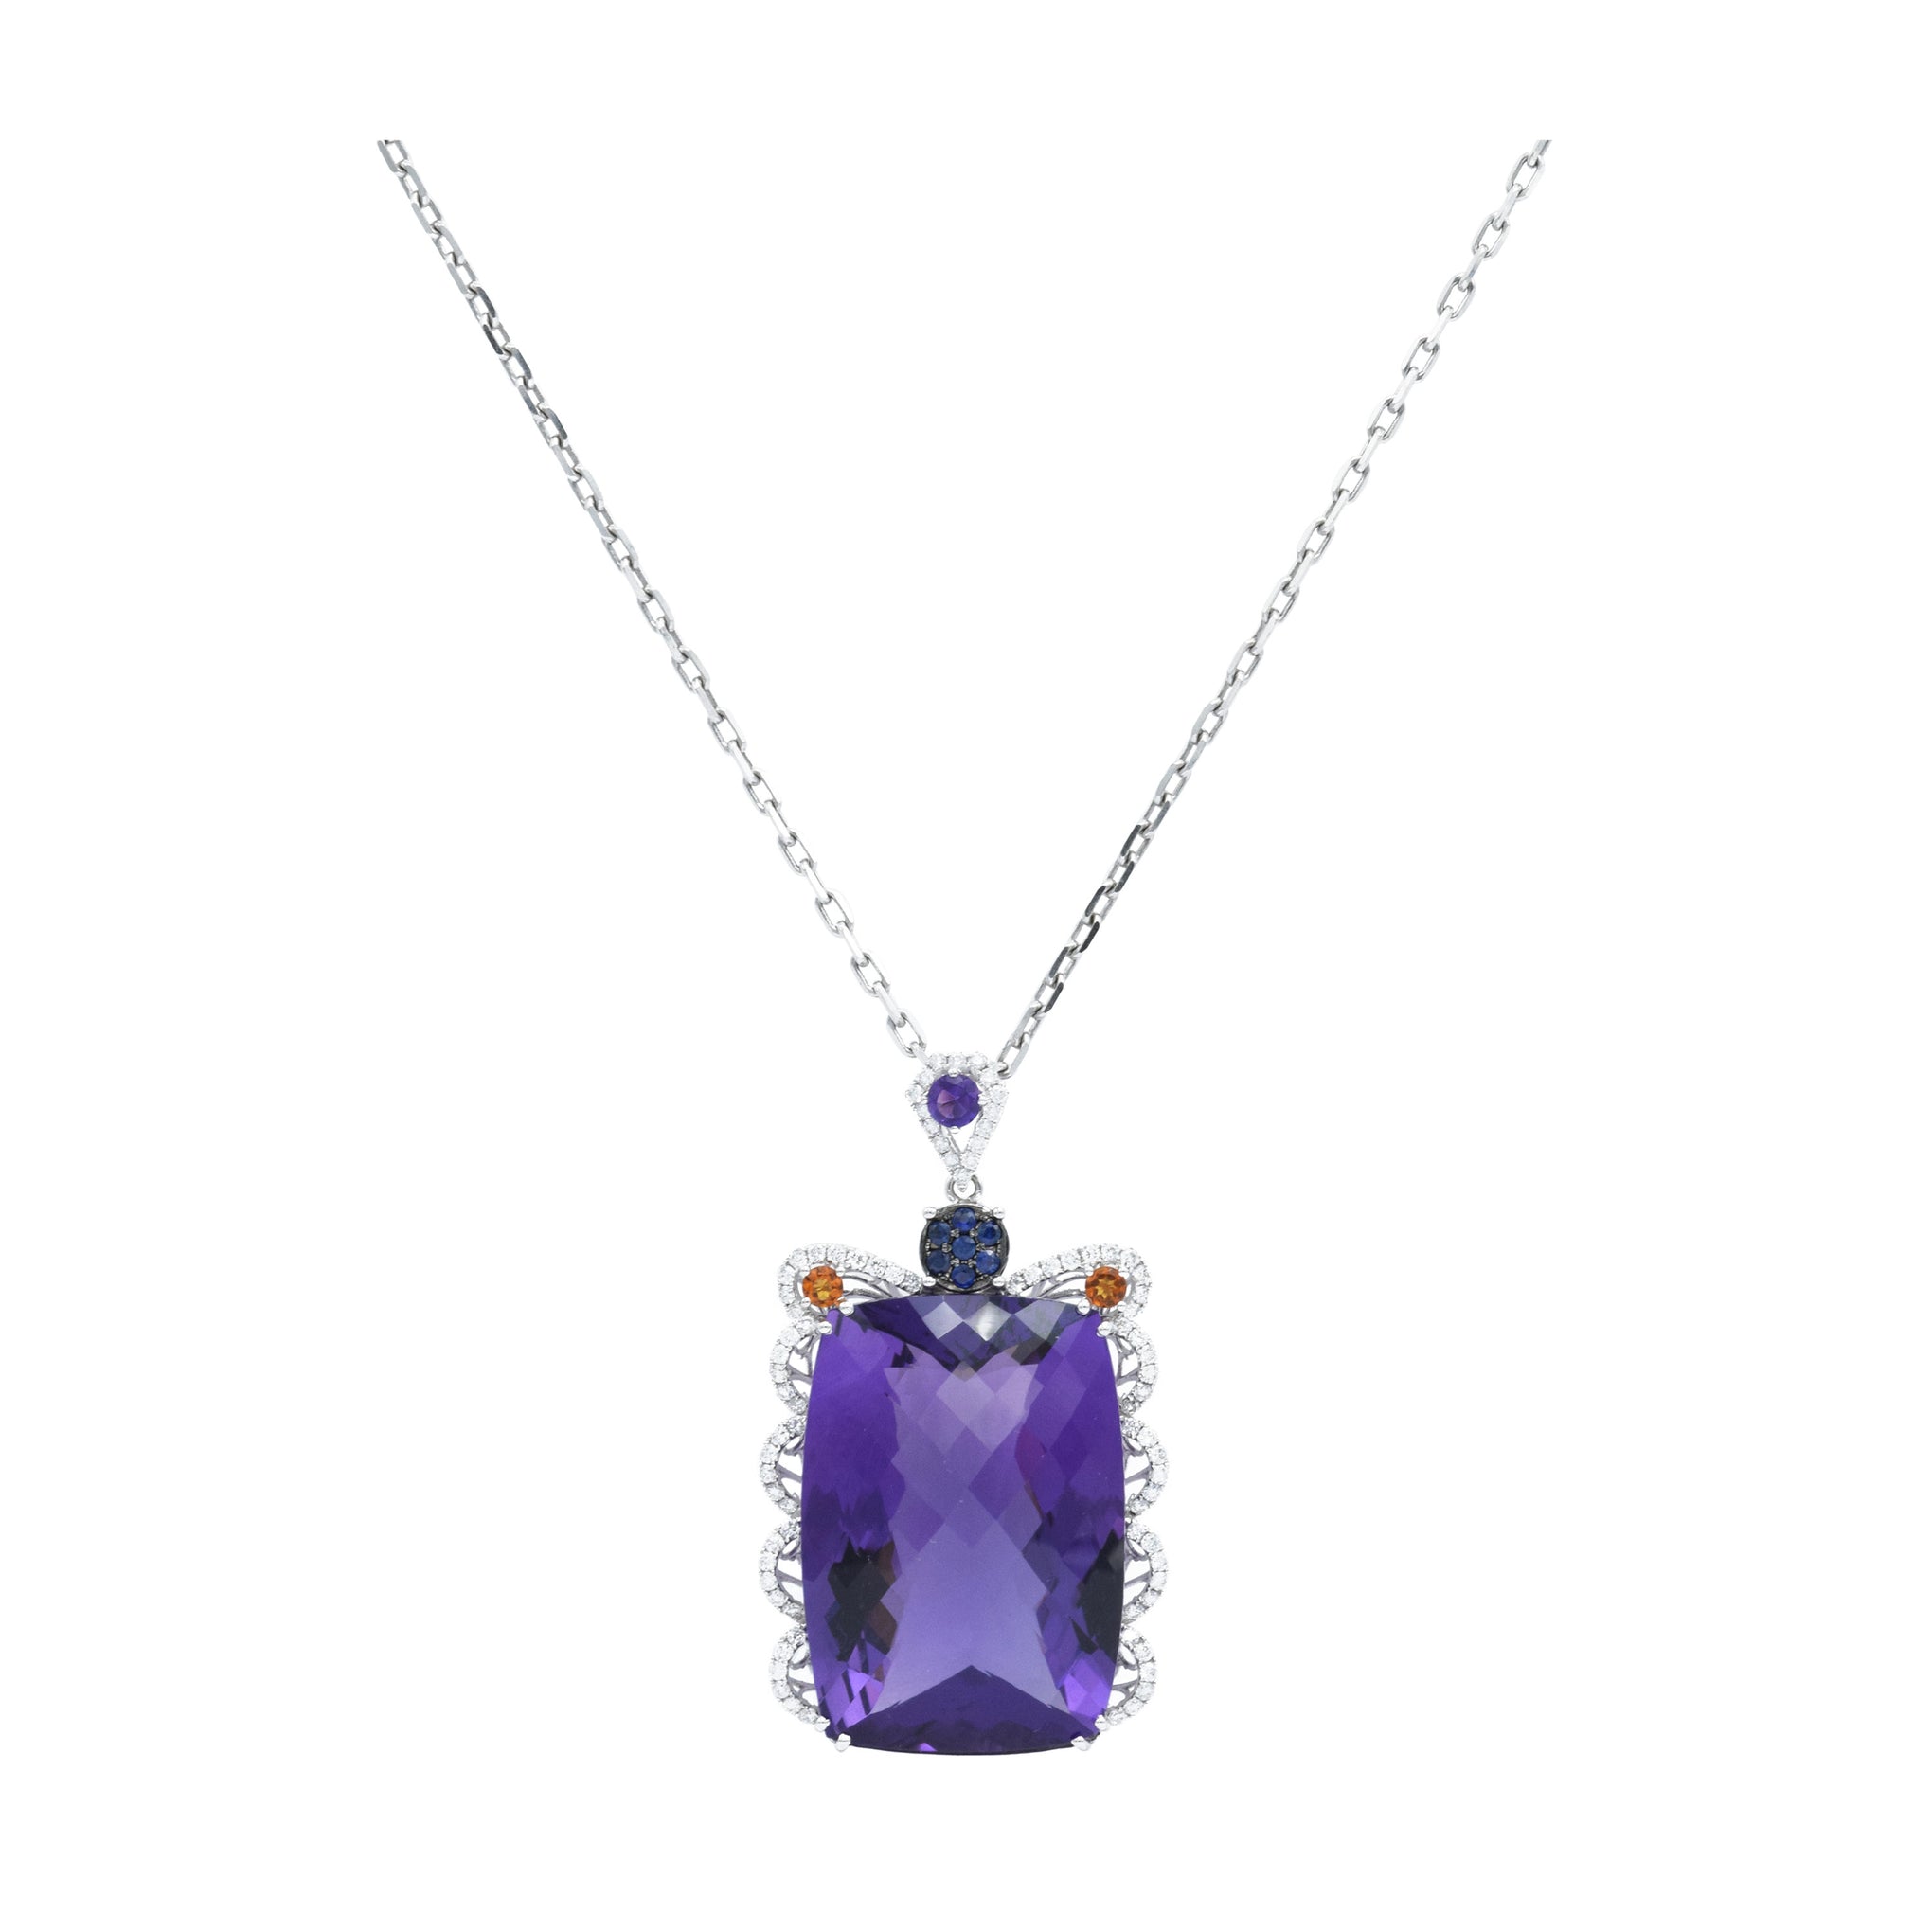 18kt White Gold Amethyst Pendant With Citrine and Sapphires